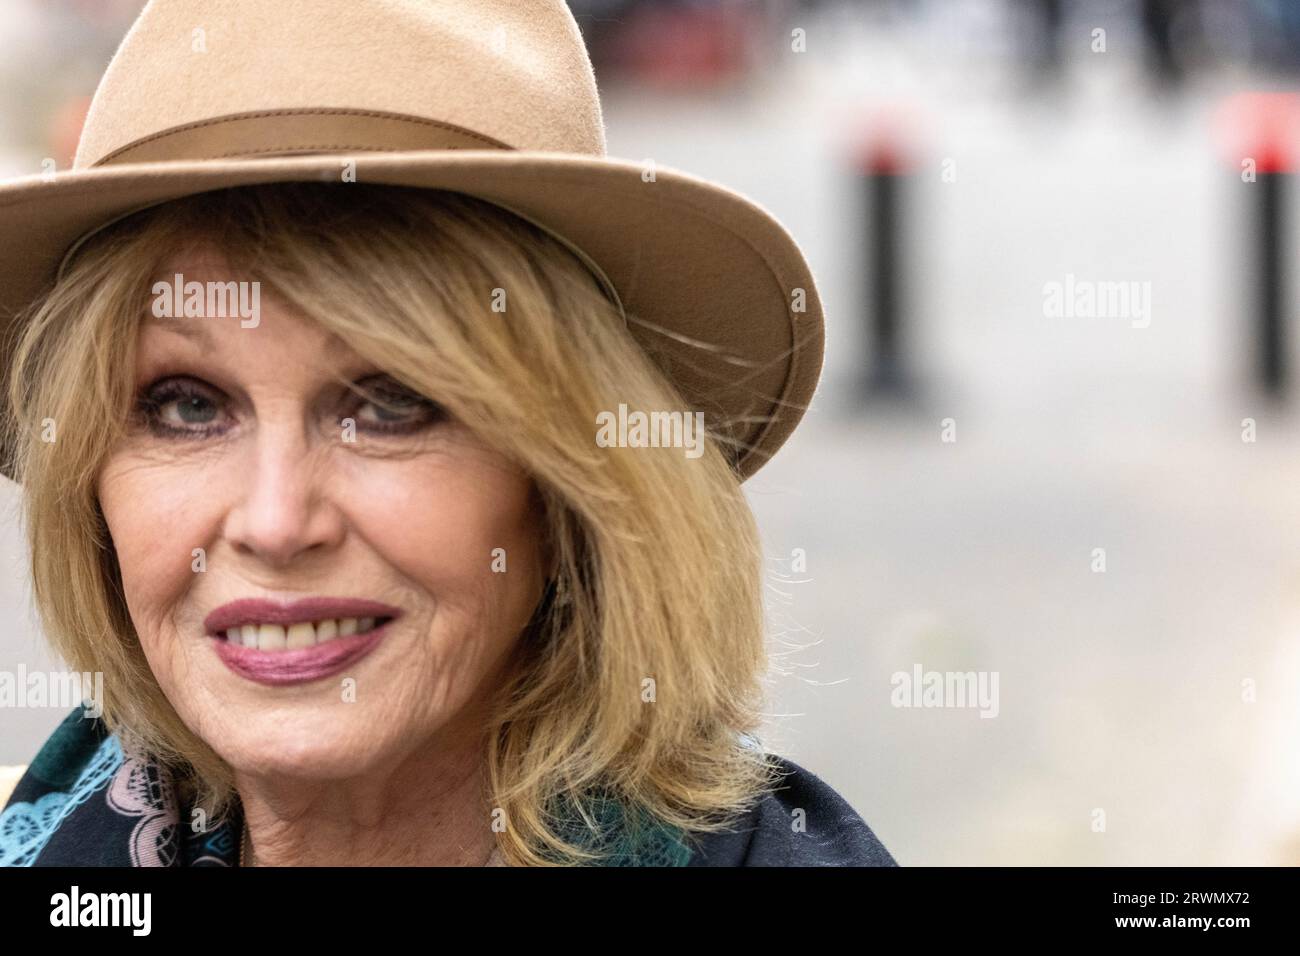 London, UK. 20th Sep, 2023. Dame Joanna Lumley hands in a ban live exports petition to 10 Downing Street London UK Credit: Ian Davidson/Alamy Live News Stock Photo